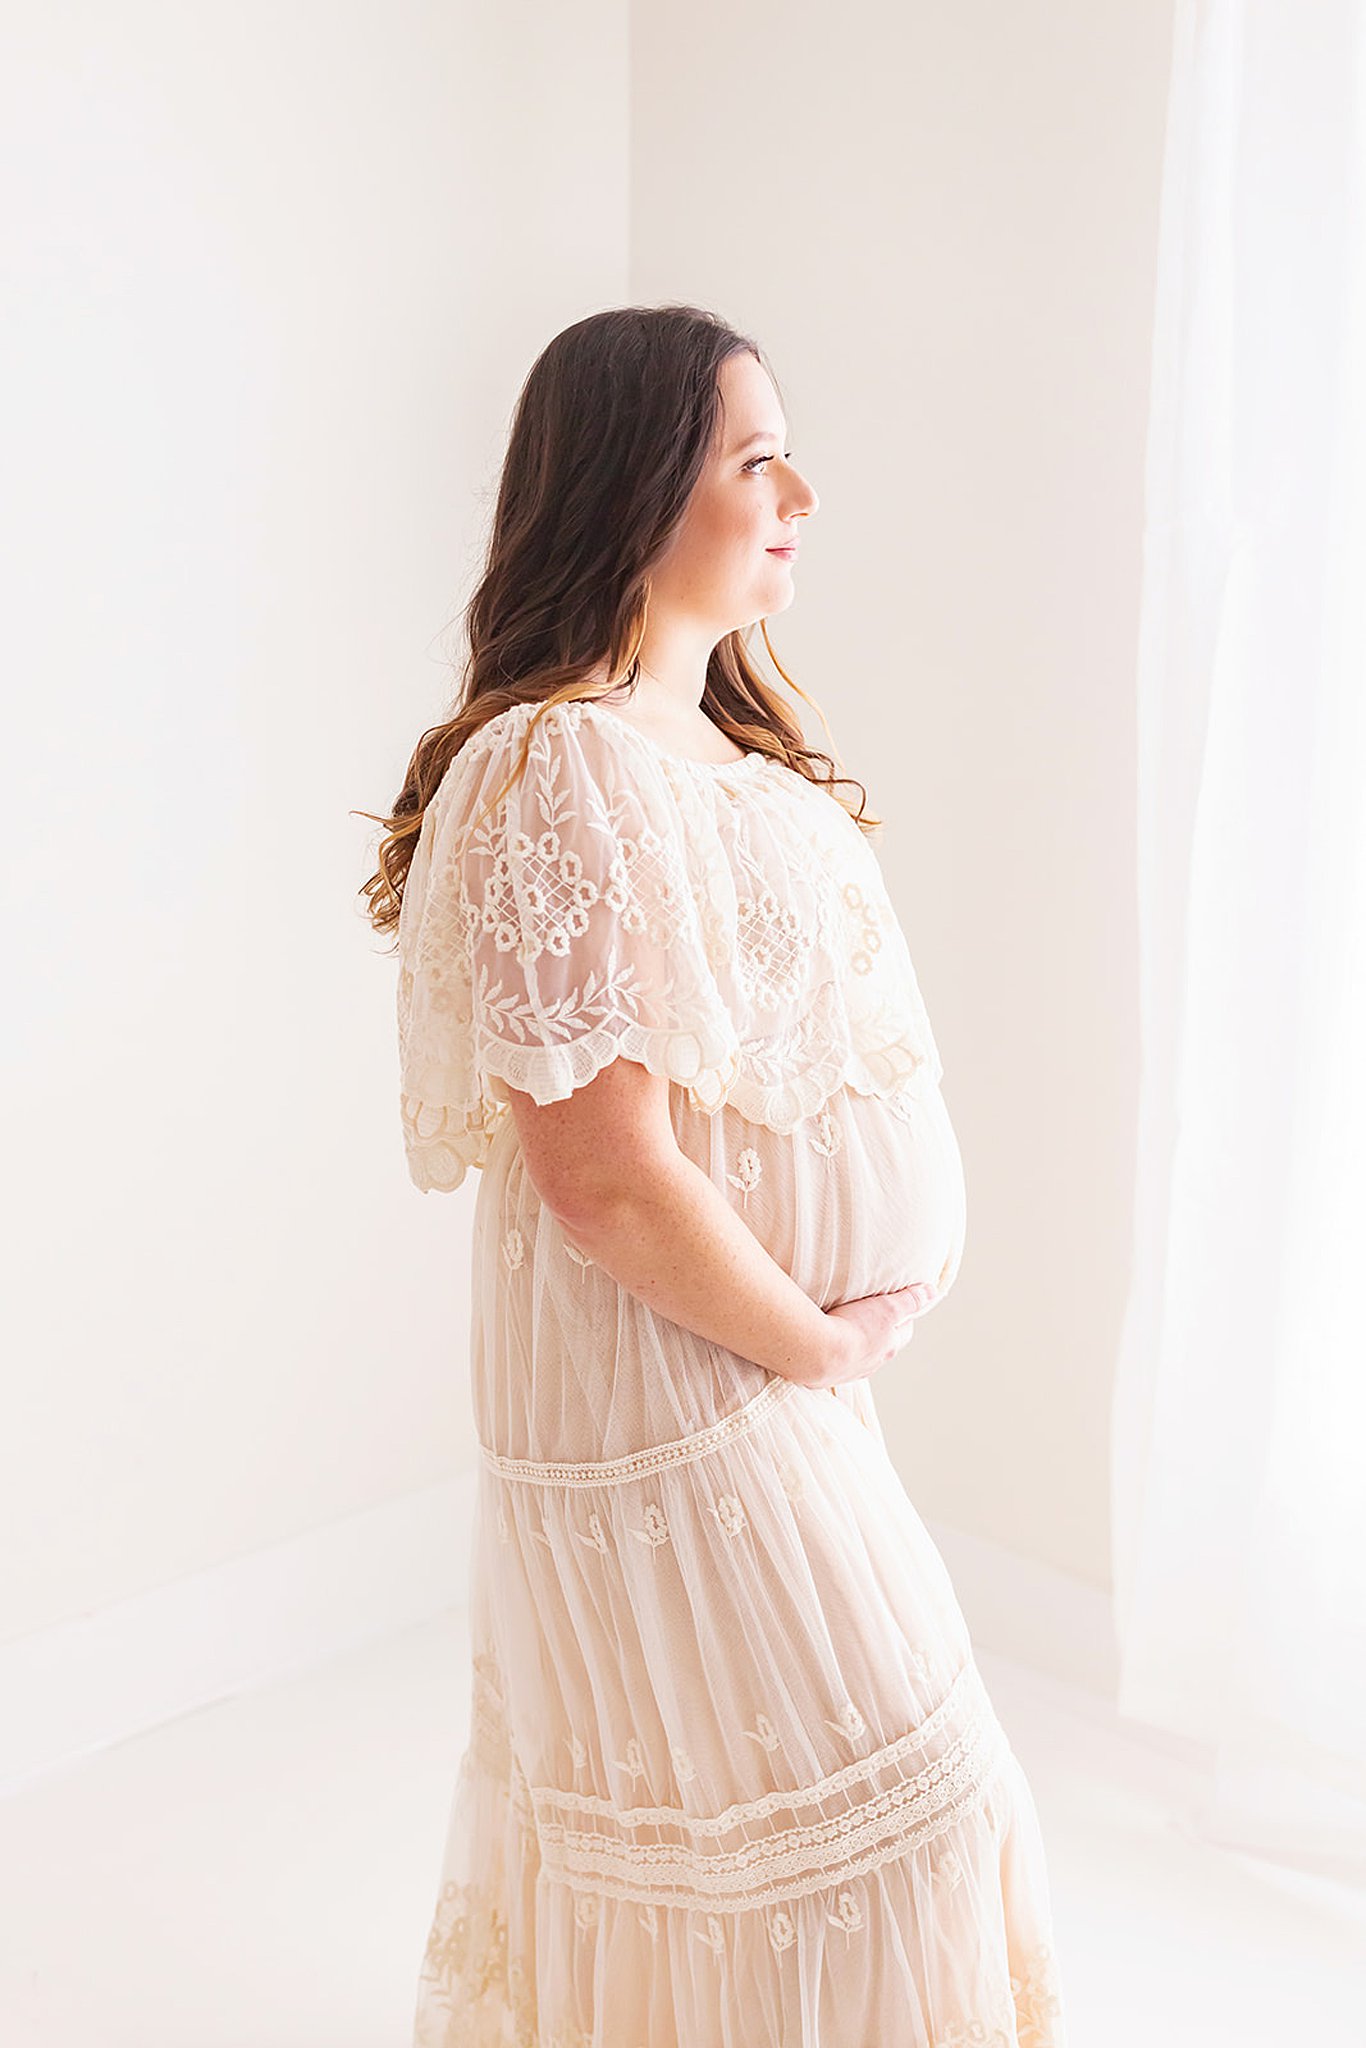 mom to be in a studio holds her bump in white gown pittsburgh doulas